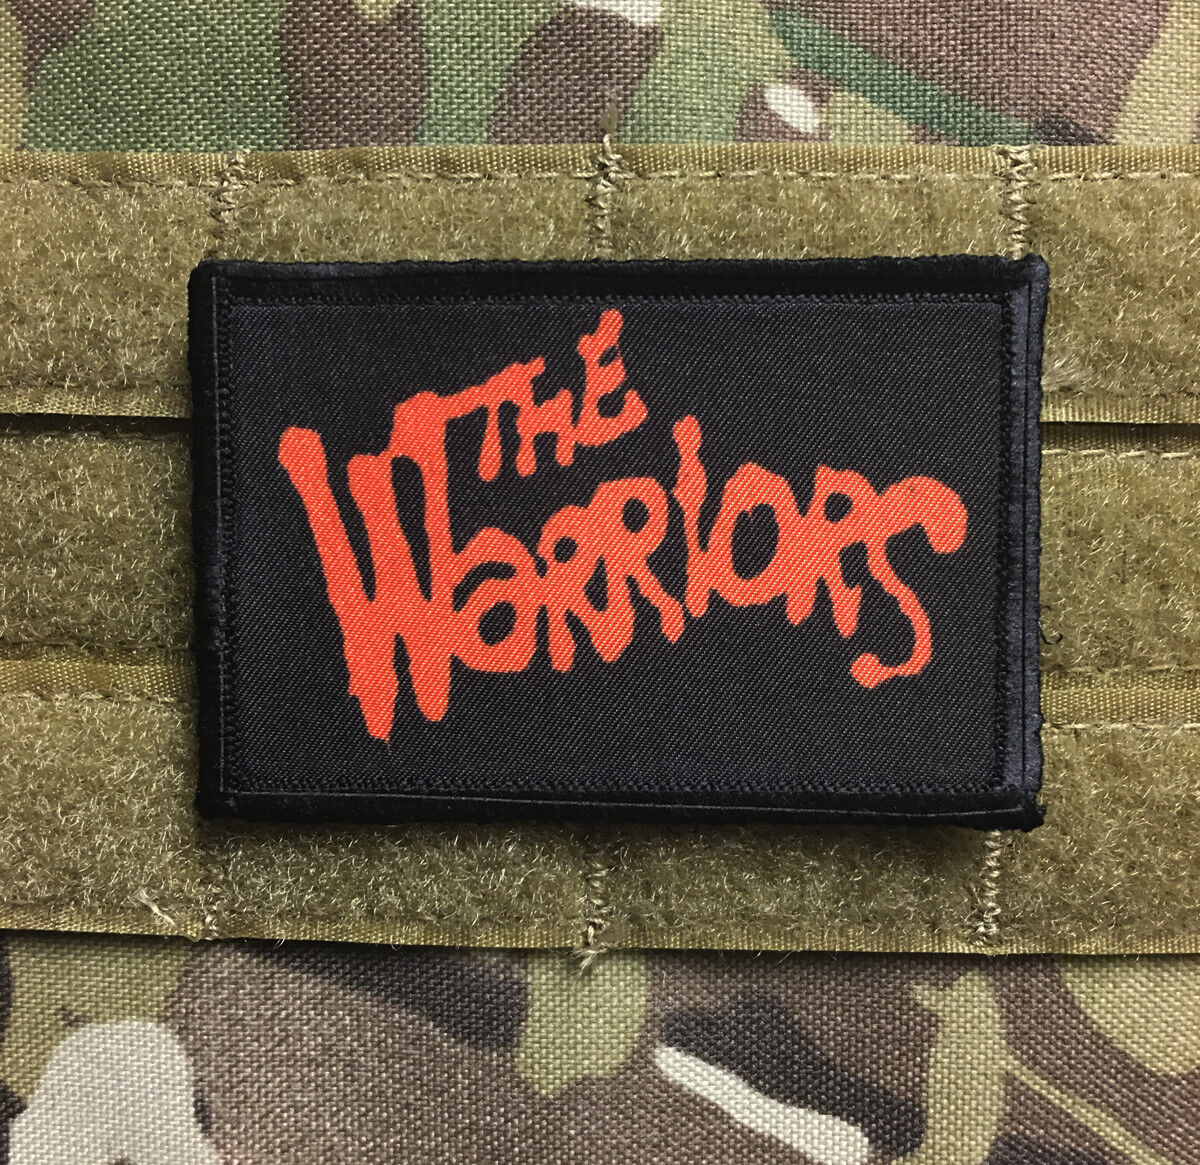 The Warriors Movie Morale Patch Funny Tactical Military USA flag Hook Badge